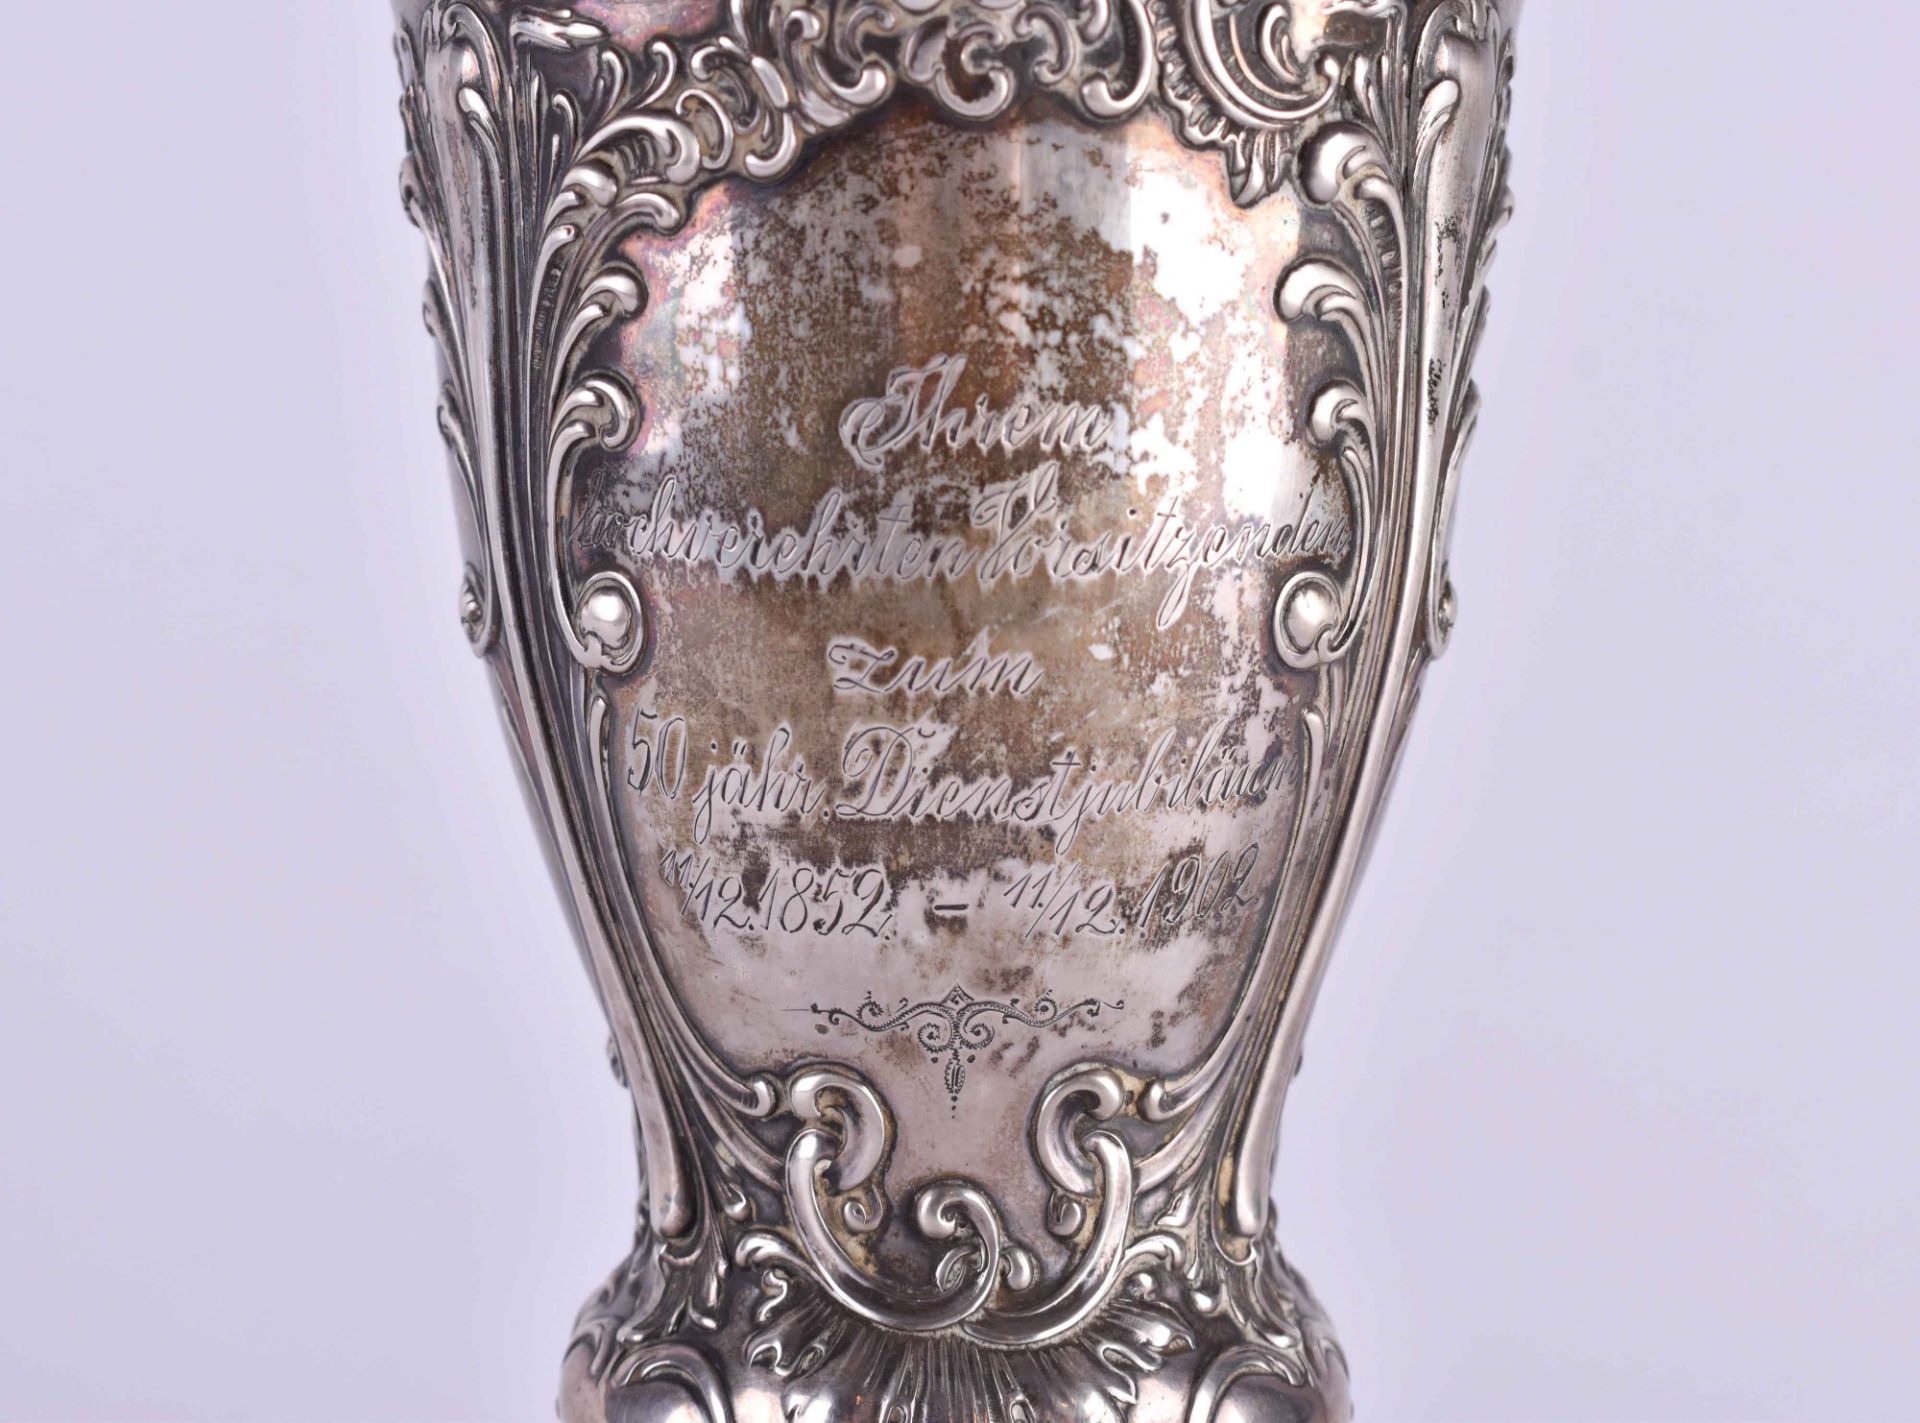 Silver lidded goblet around 1900 - Image 2 of 4